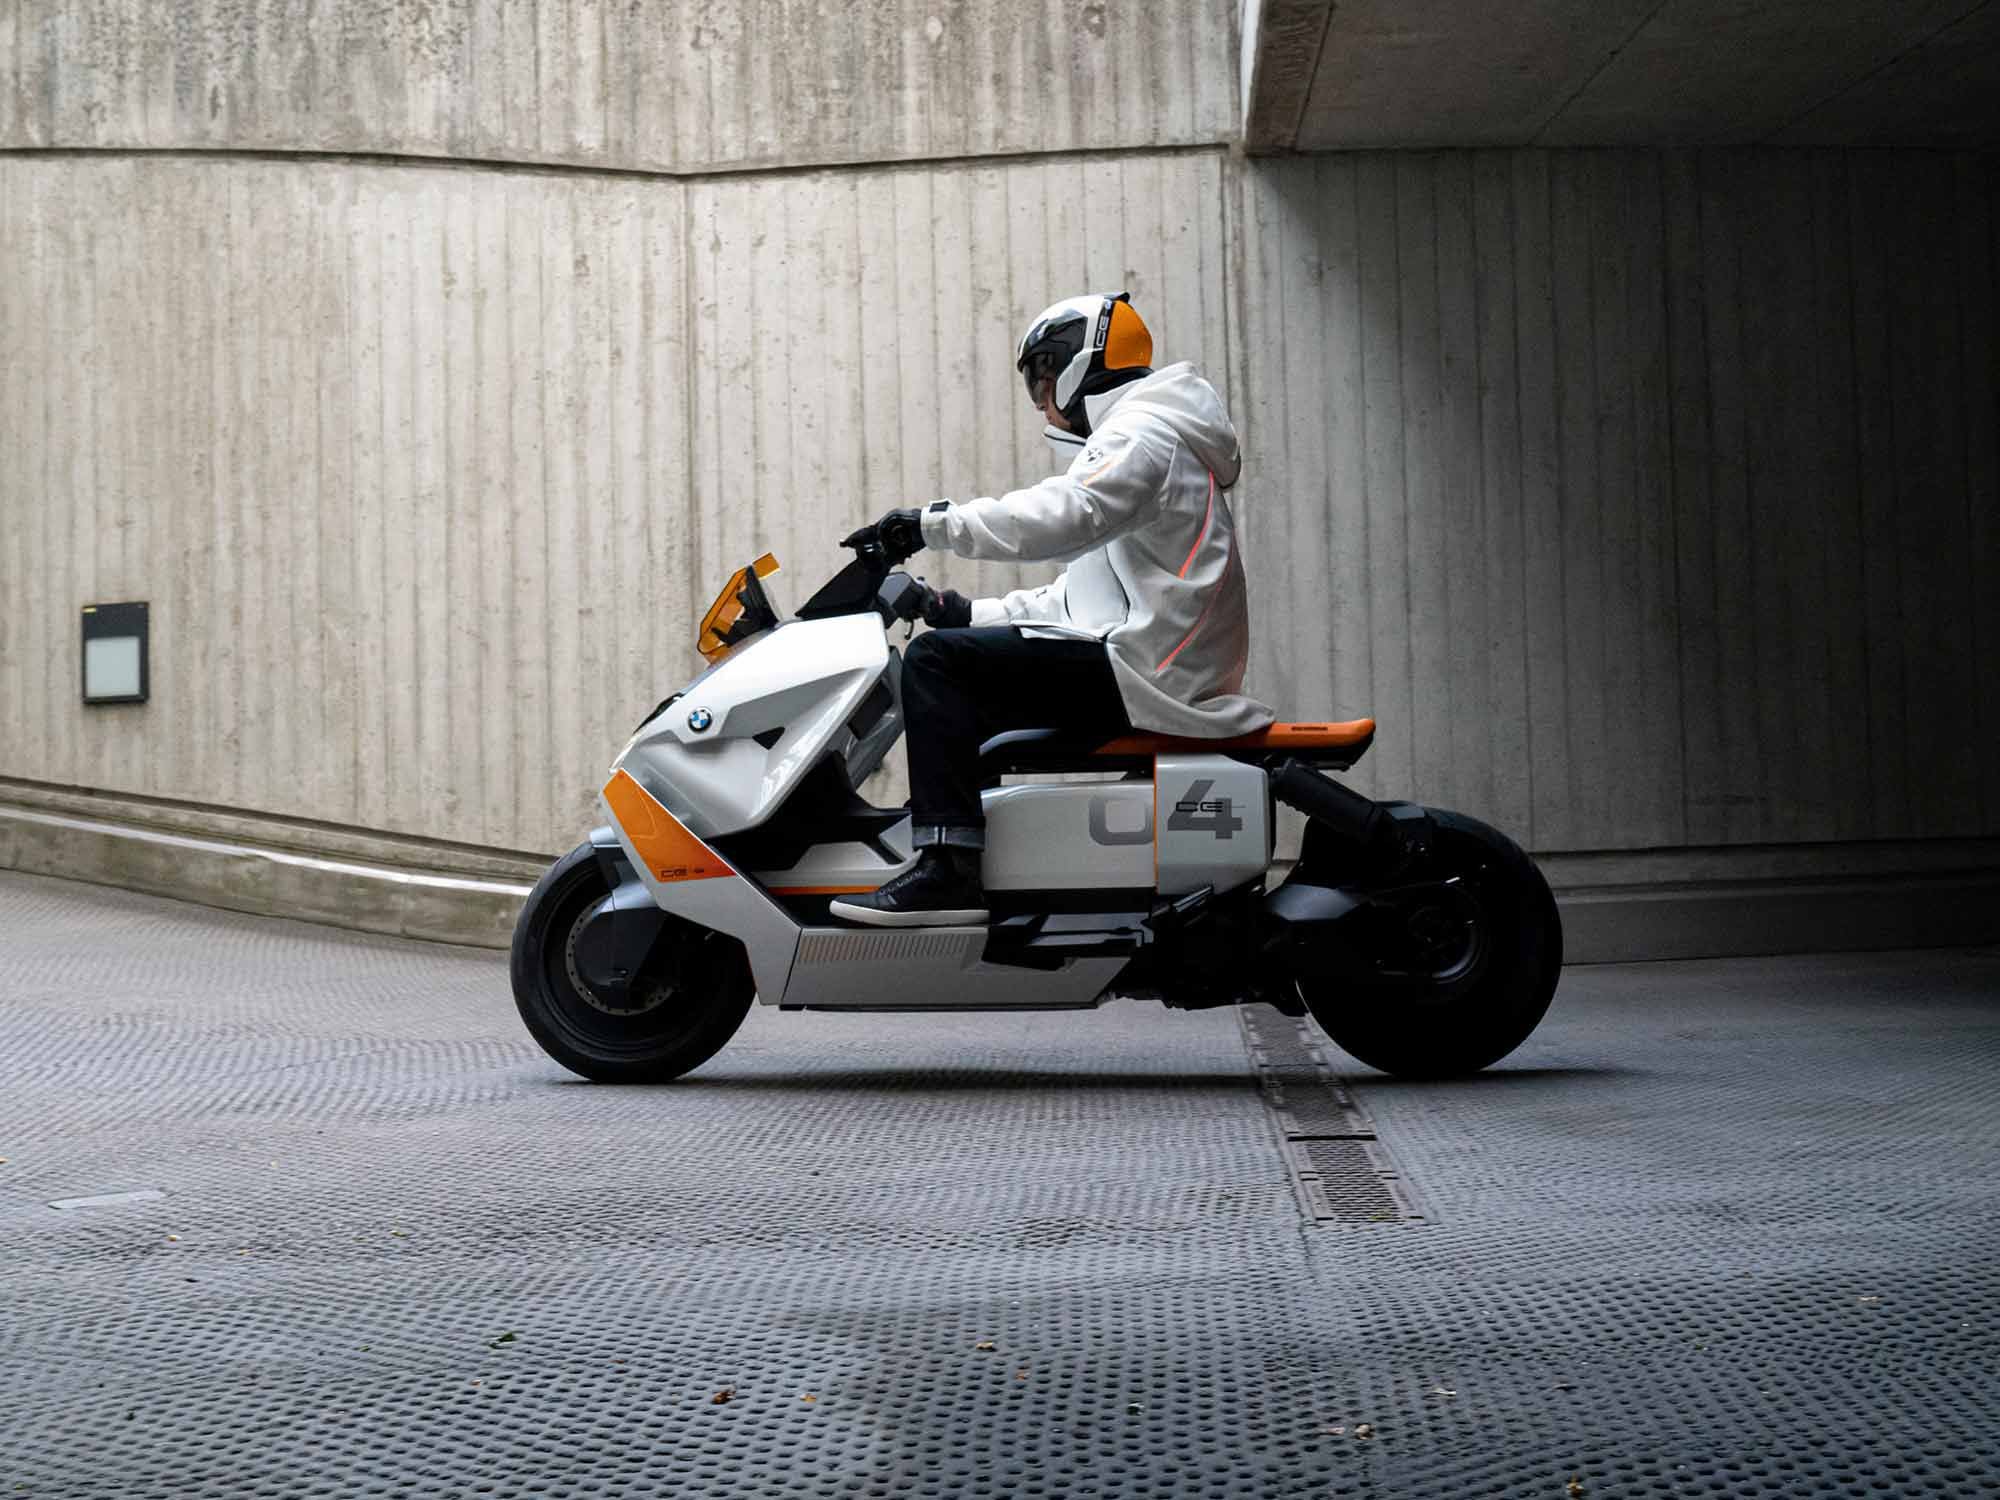 Reduced battery weight placed lower in the chassis than the C Evolution scooter is said to make the Definition CE 04 more suitable for the rigors of urban use.